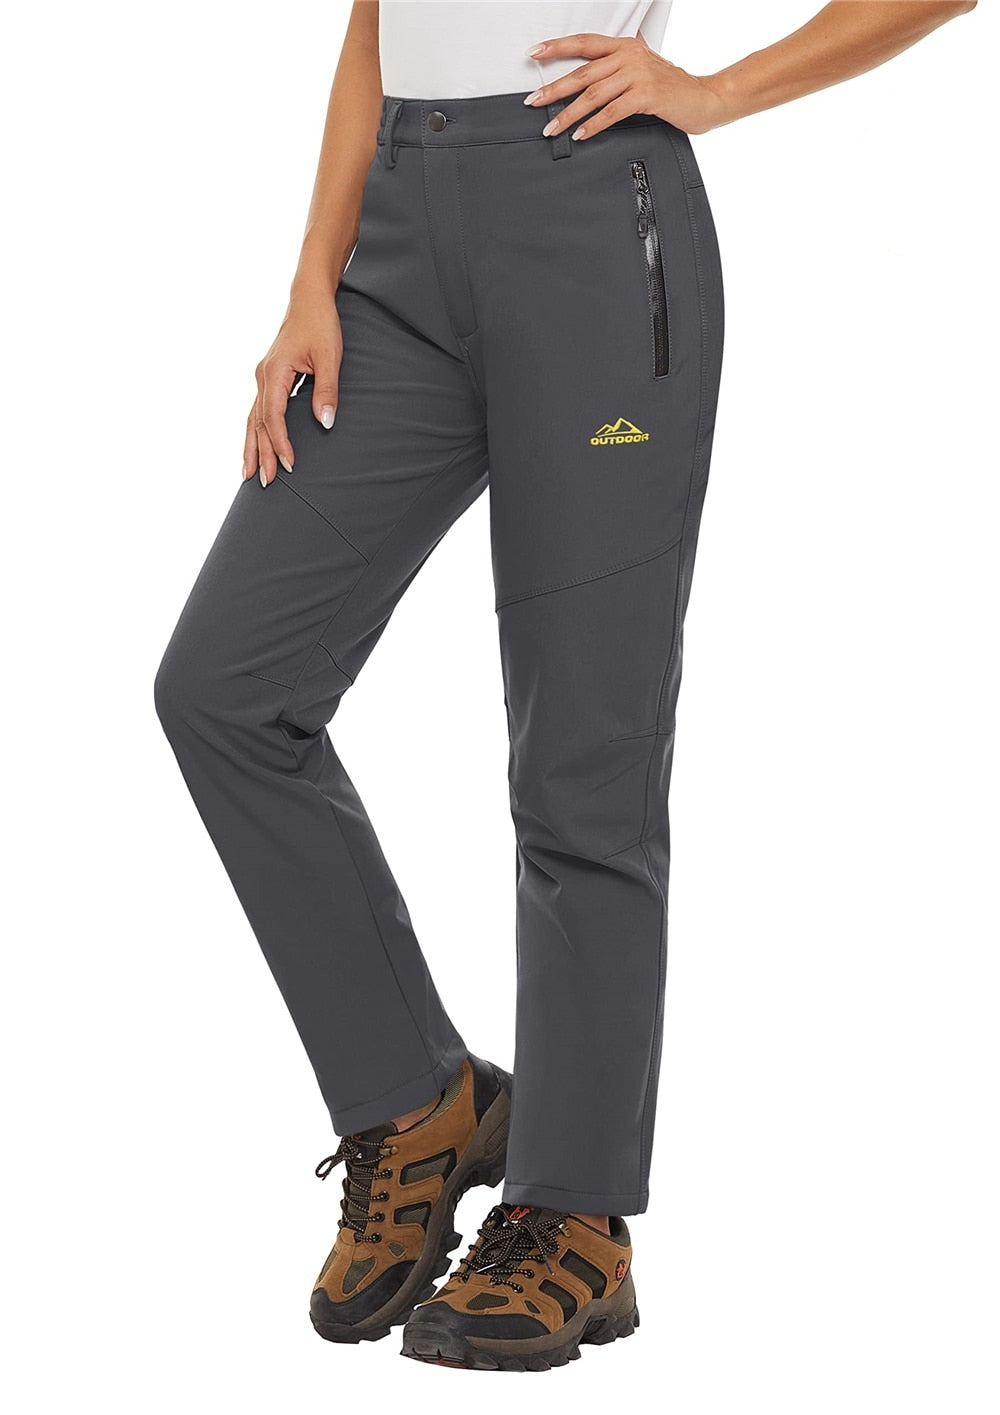 10 best fleecelined hiking pants thatll keep you warm in extreme cold